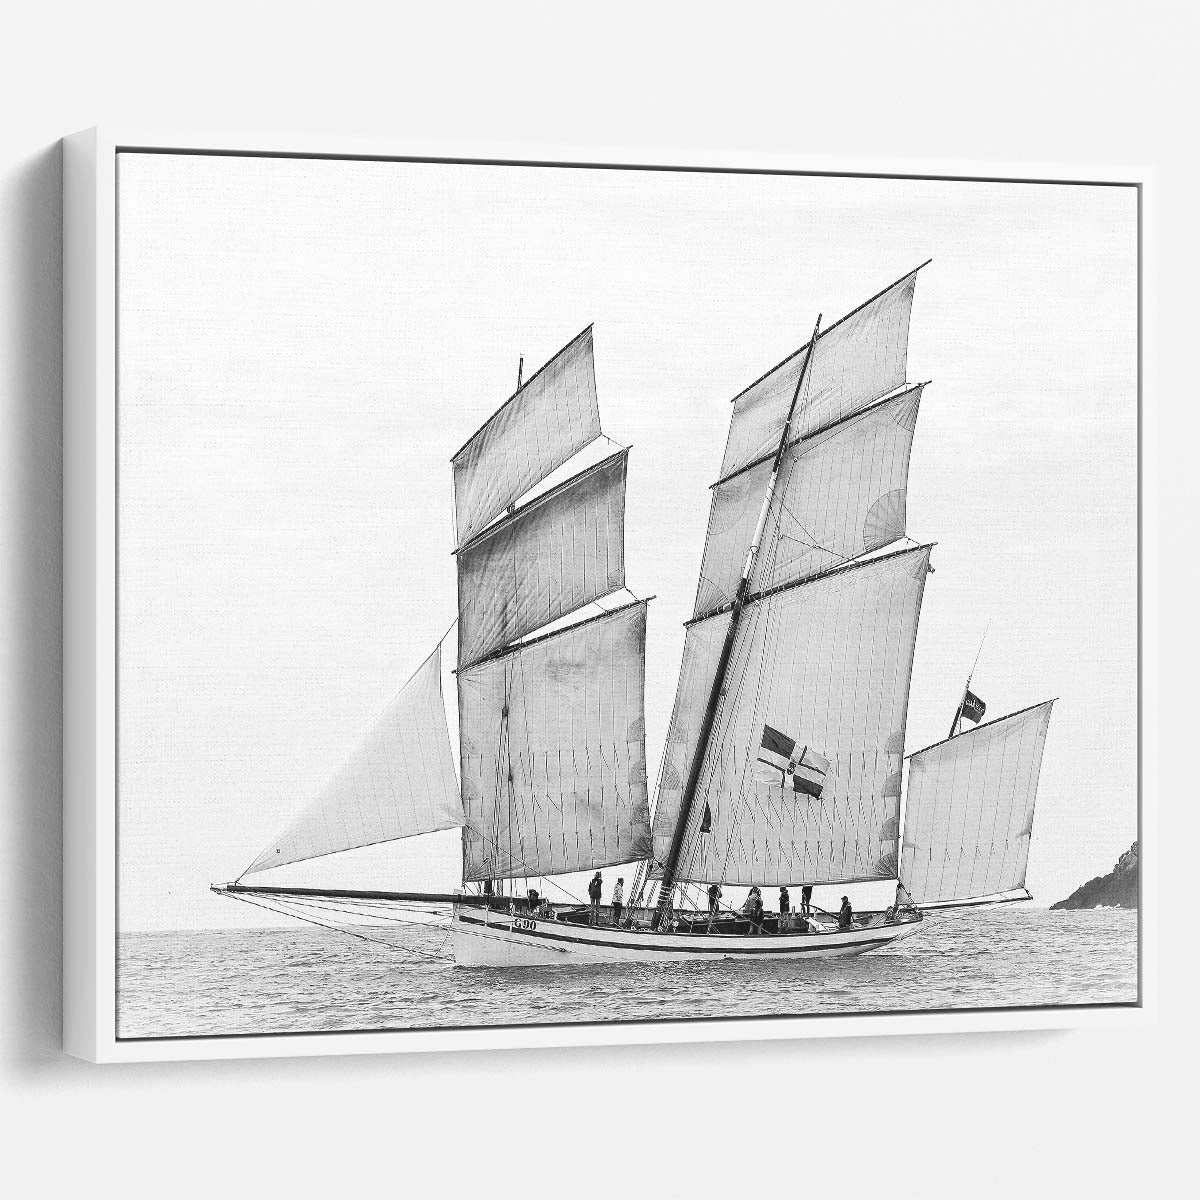 Monochrome Maritime Seascape Sailing Ship Wall Art by Luxuriance Designs. Made in USA.